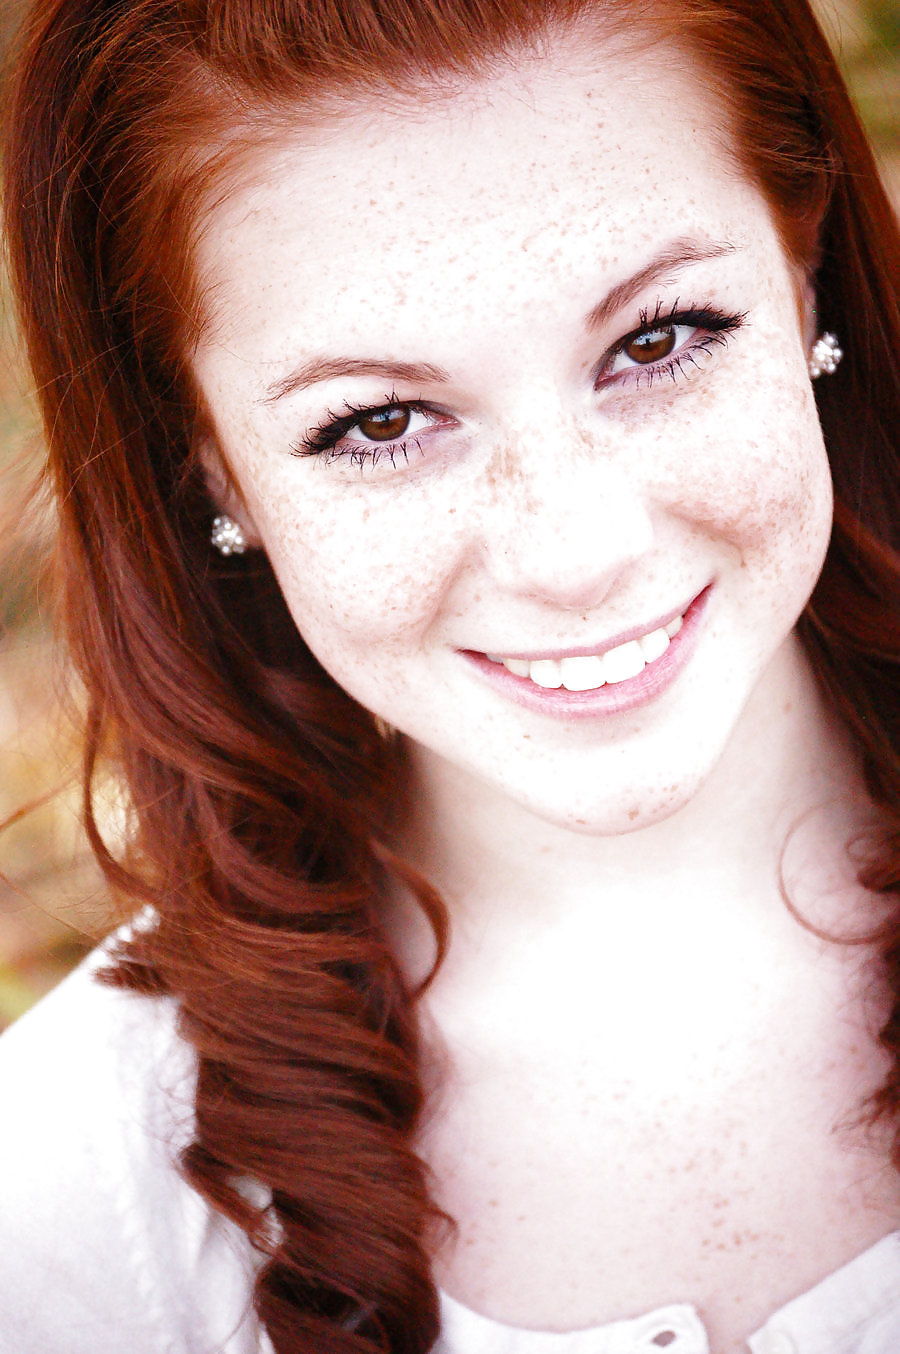 The Beauty Of Redheads & Freckles #11078999